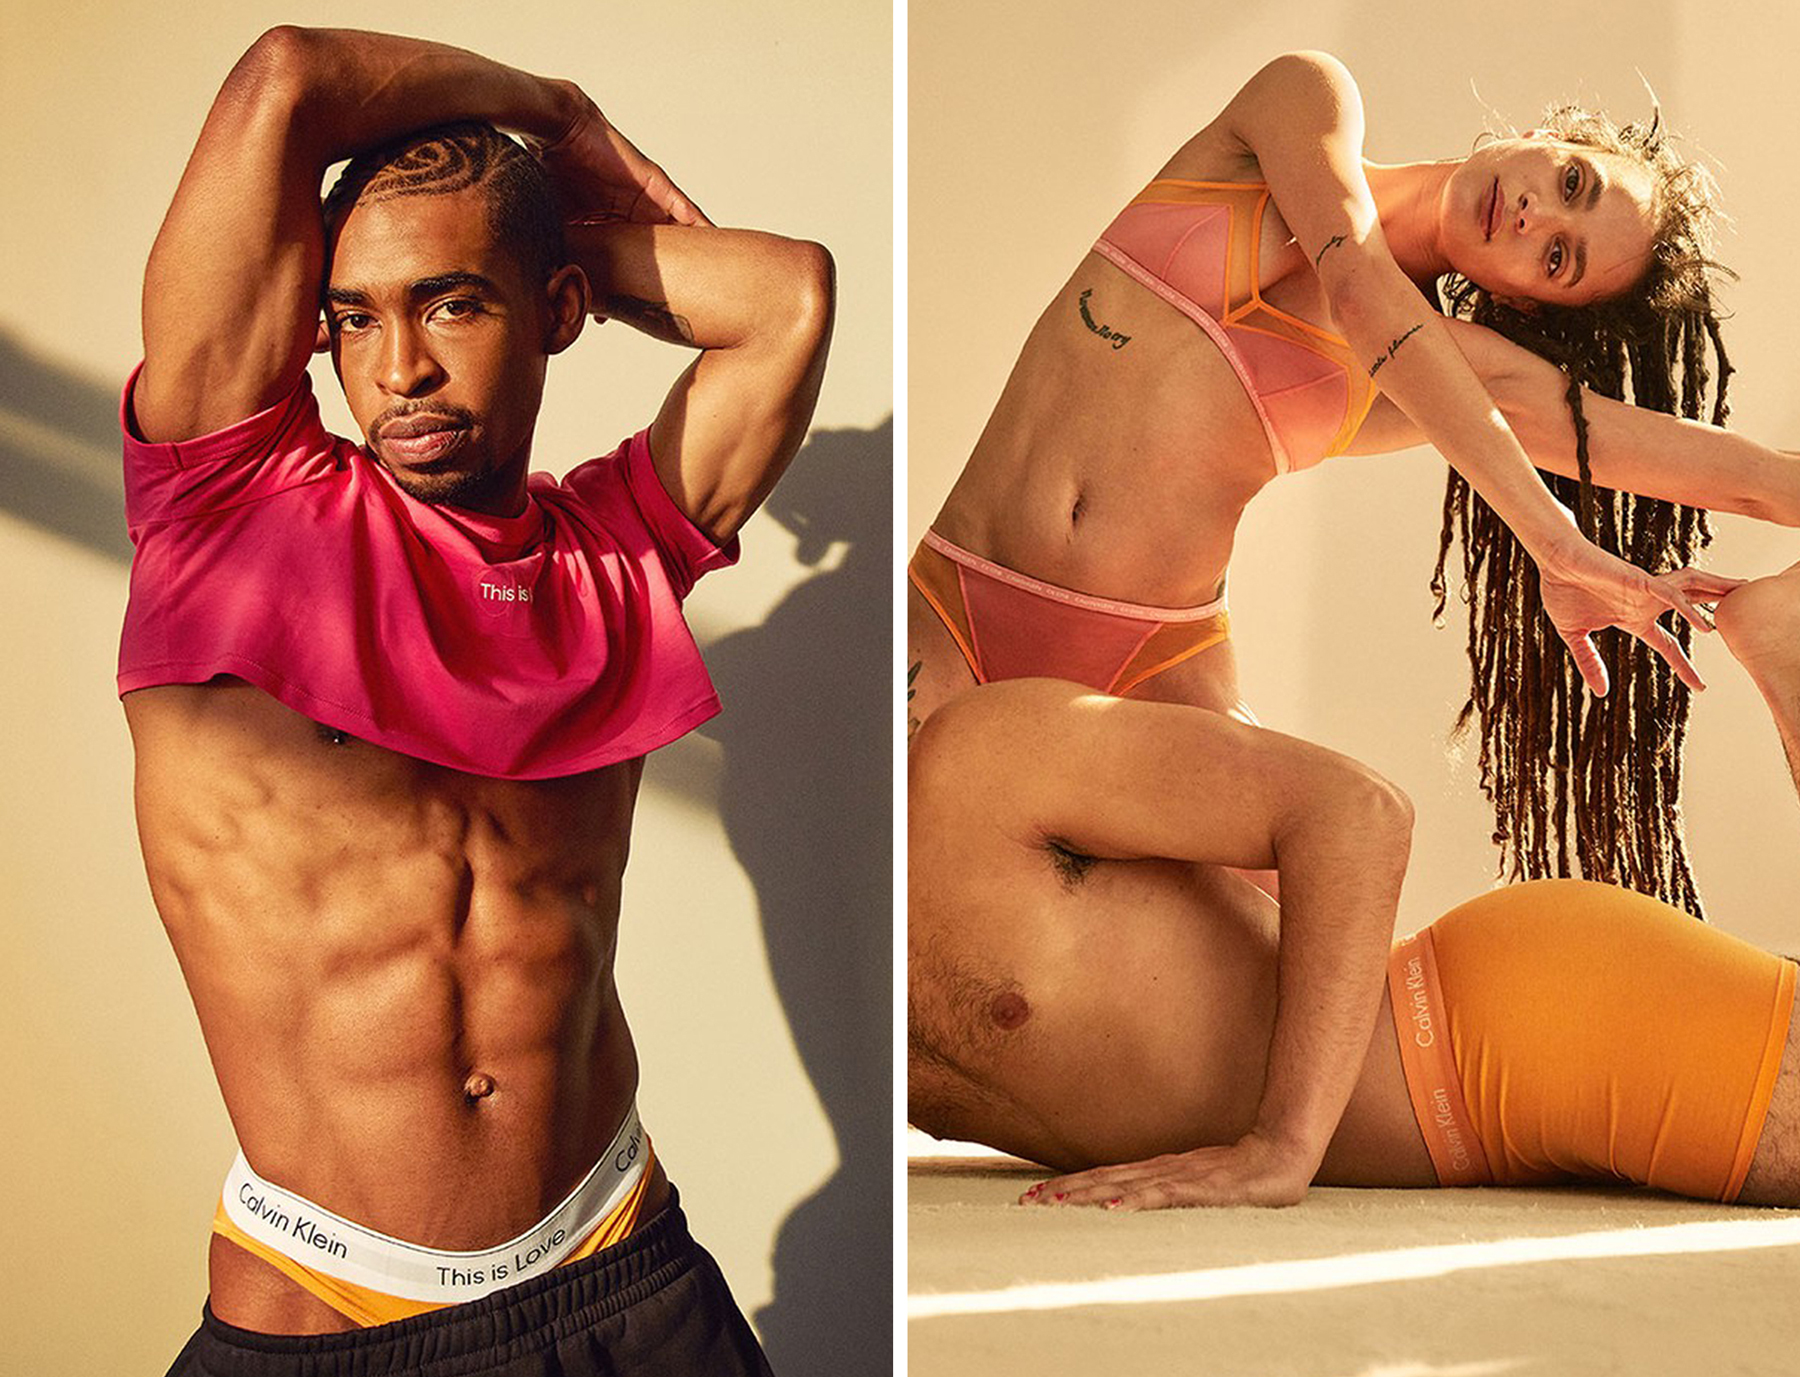 CAMPAIGN: CALVIN KLEIN THIS IS LOVE